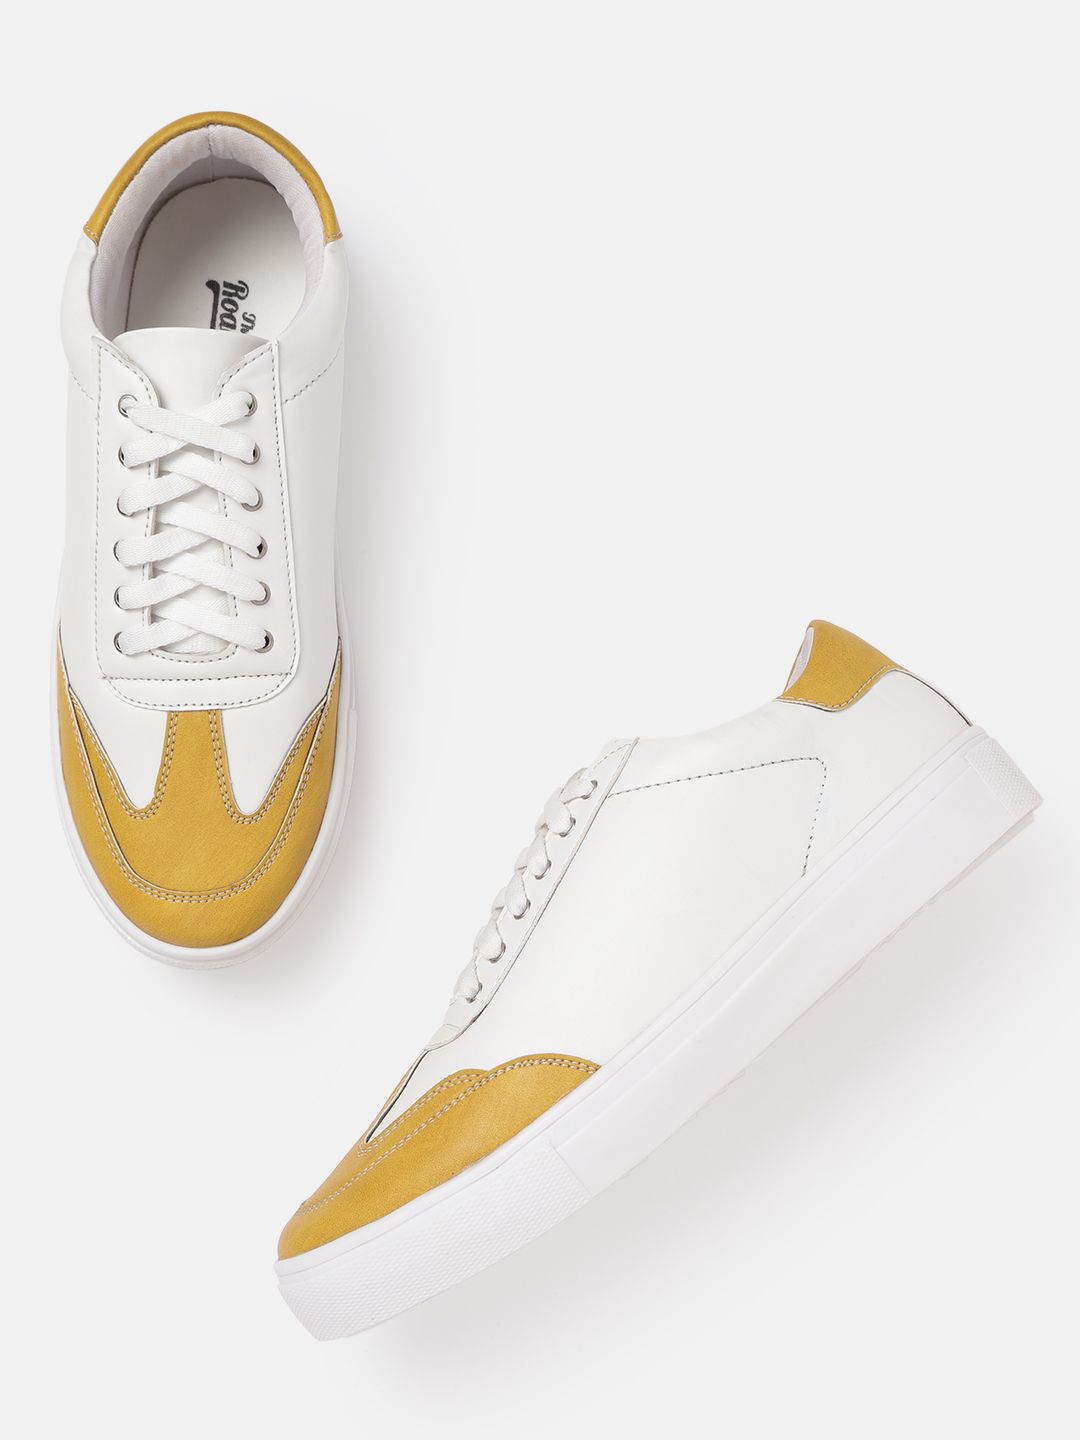 Roadster Women White & Mustard Yellow Colourblocked Sneakers Price in India